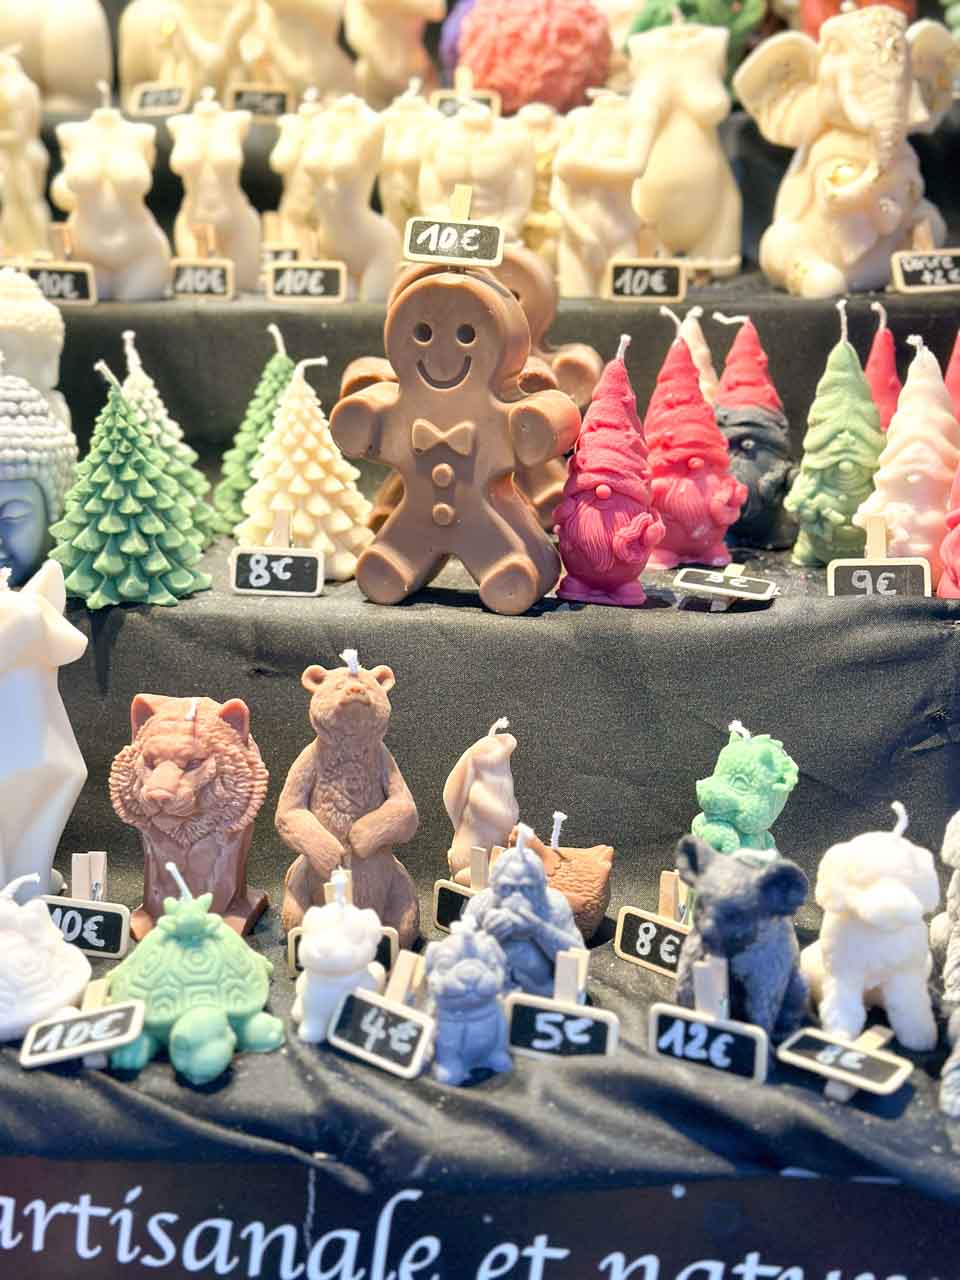 An assortment of handcrafted candles moulded into festive shapes and characters at a Christmas market in Colmar